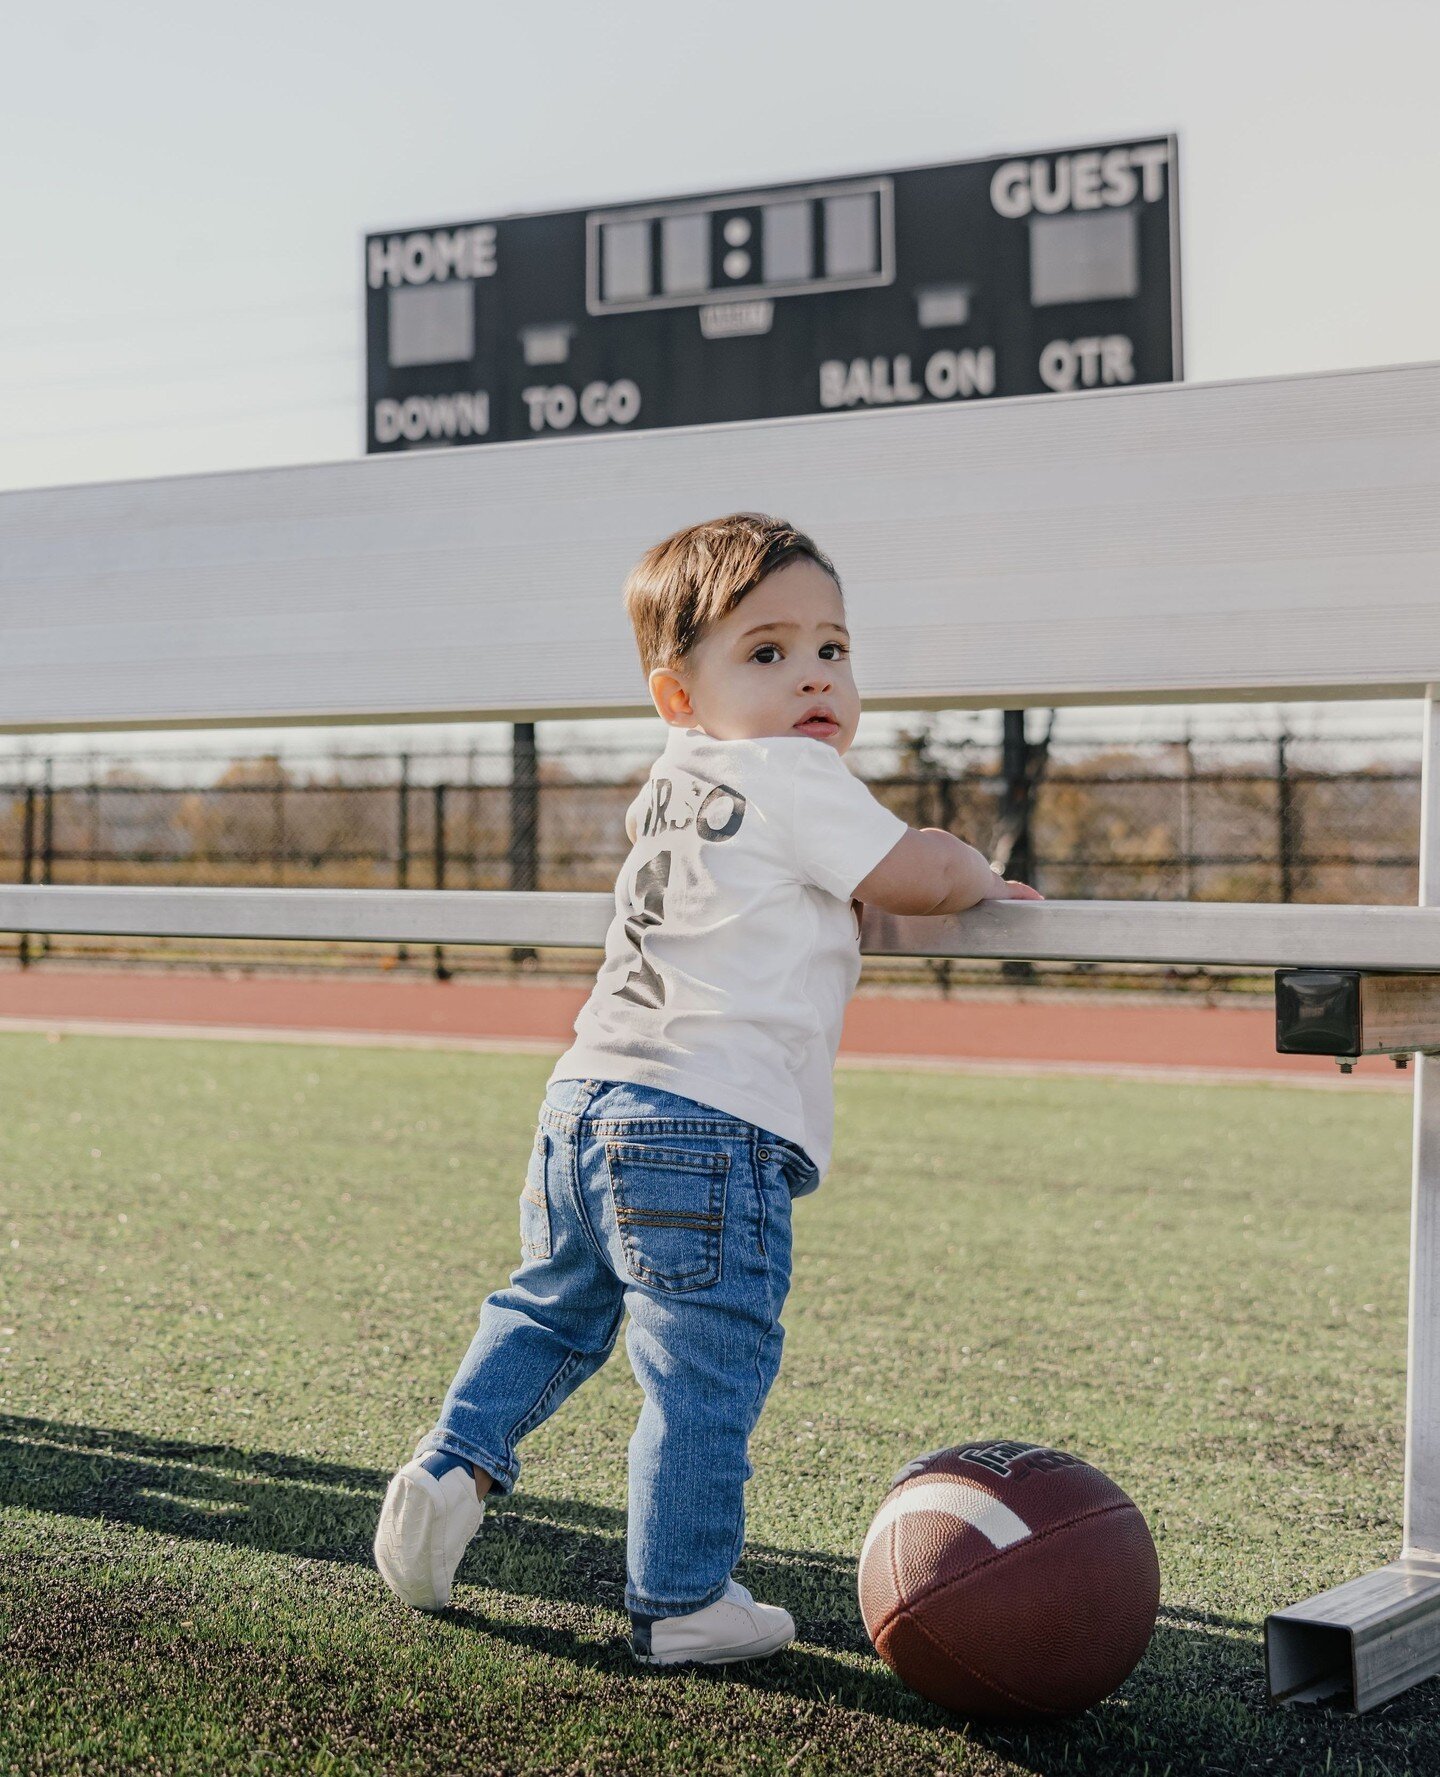 in honor of yesterdays big game, here's the cutest little one year old!⁠
@miaurso_⁠
.⁠
.⁠
.⁠
.⁠
.⁠
.⁠
.⁠
.⁠
.⁠
.⁠
.⁠
.⁠
.⁠
.⁠
.⁠
.⁠
.⁠
.⁠
.⁠
.⁠
.⁠
.⁠
.⁠
.⁠
.⁠
.⁠
.⁠
.⁠
.⁠
.⁠
.⁠
.⁠
.⁠
.⁠
.⁠
.⁠
.⁠
.⁠
.⁠
#birthdayshootinspo #freelancephotographer #newje